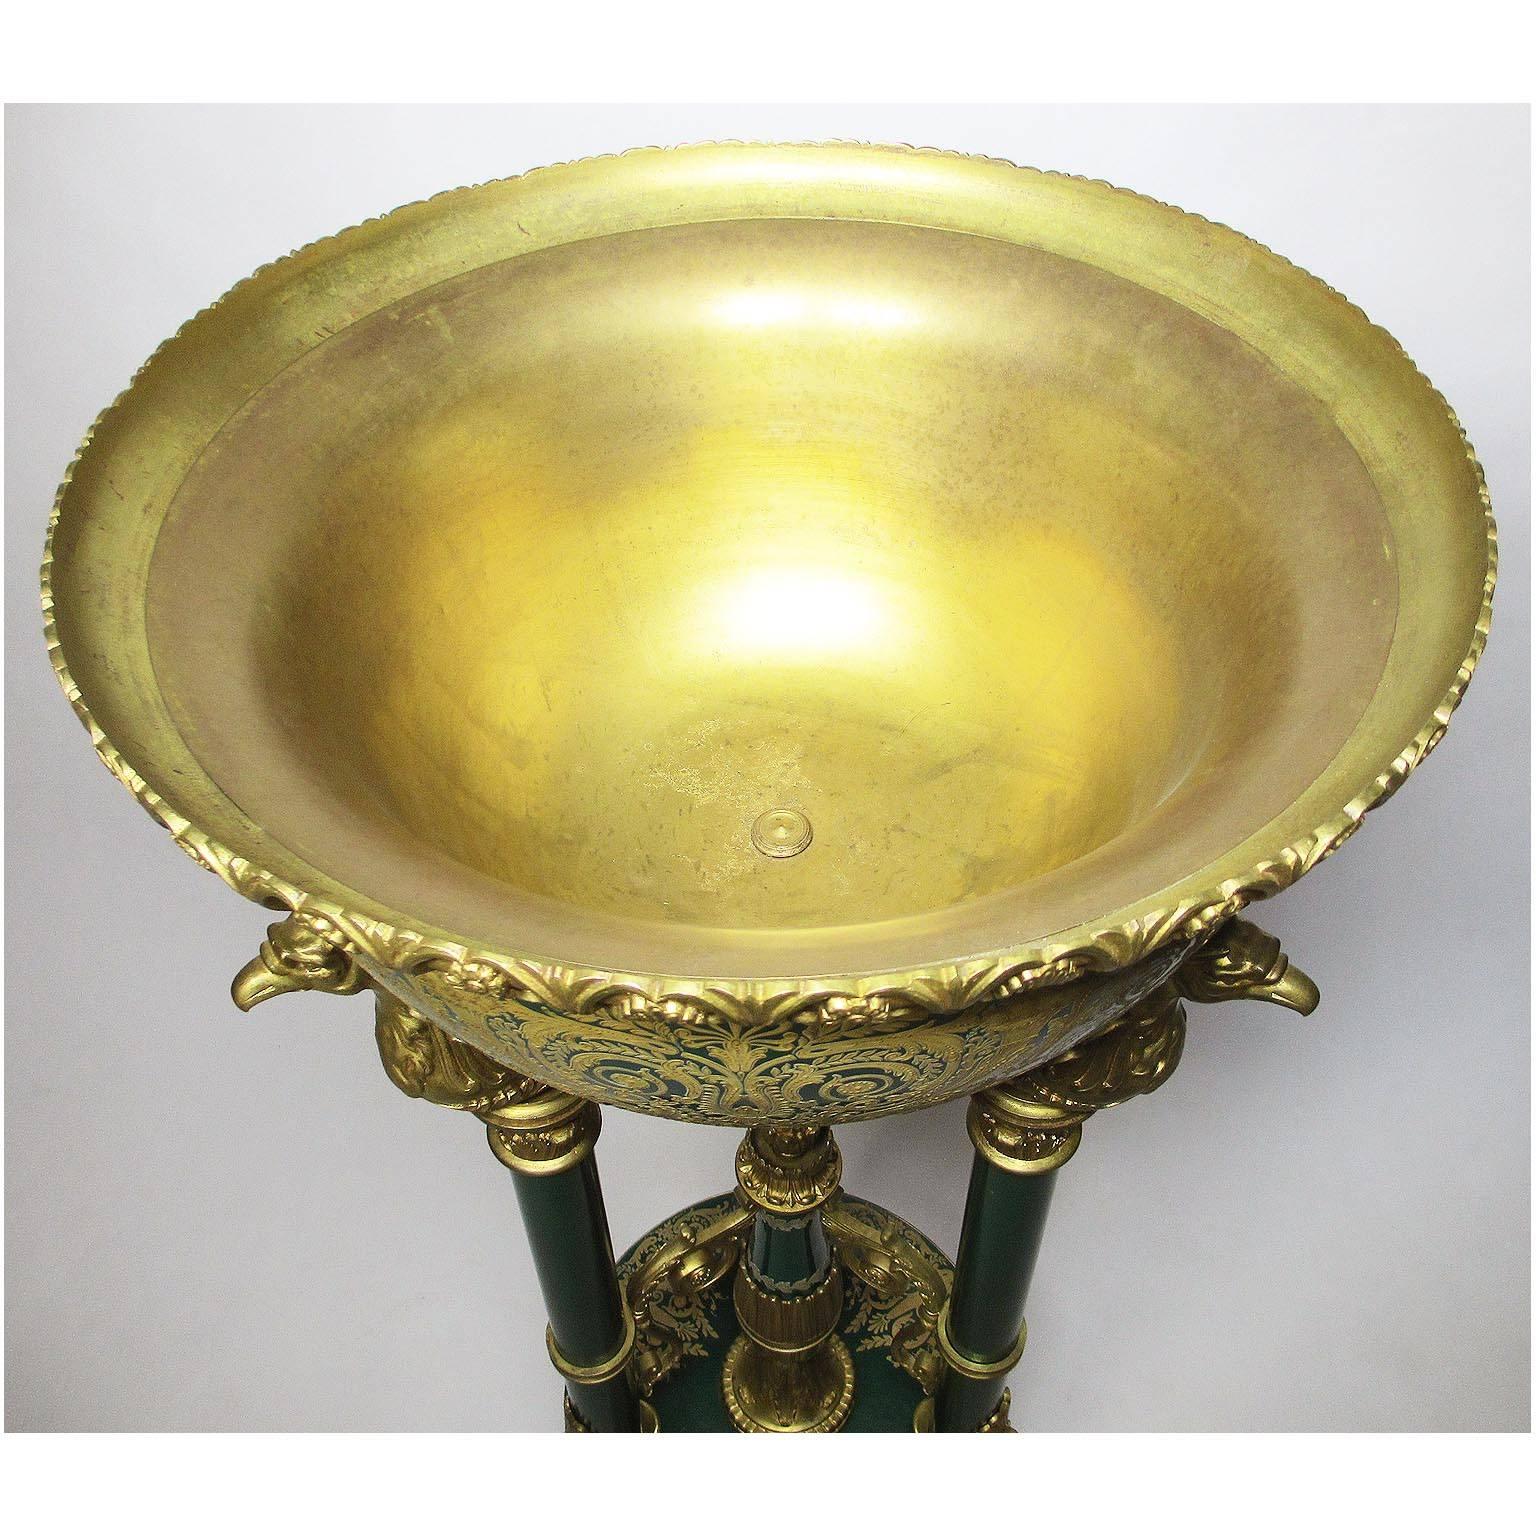 Fine French 19th Century Napoleon III Gilt Bronze-Mounted Porcelain Planter For Sale 2